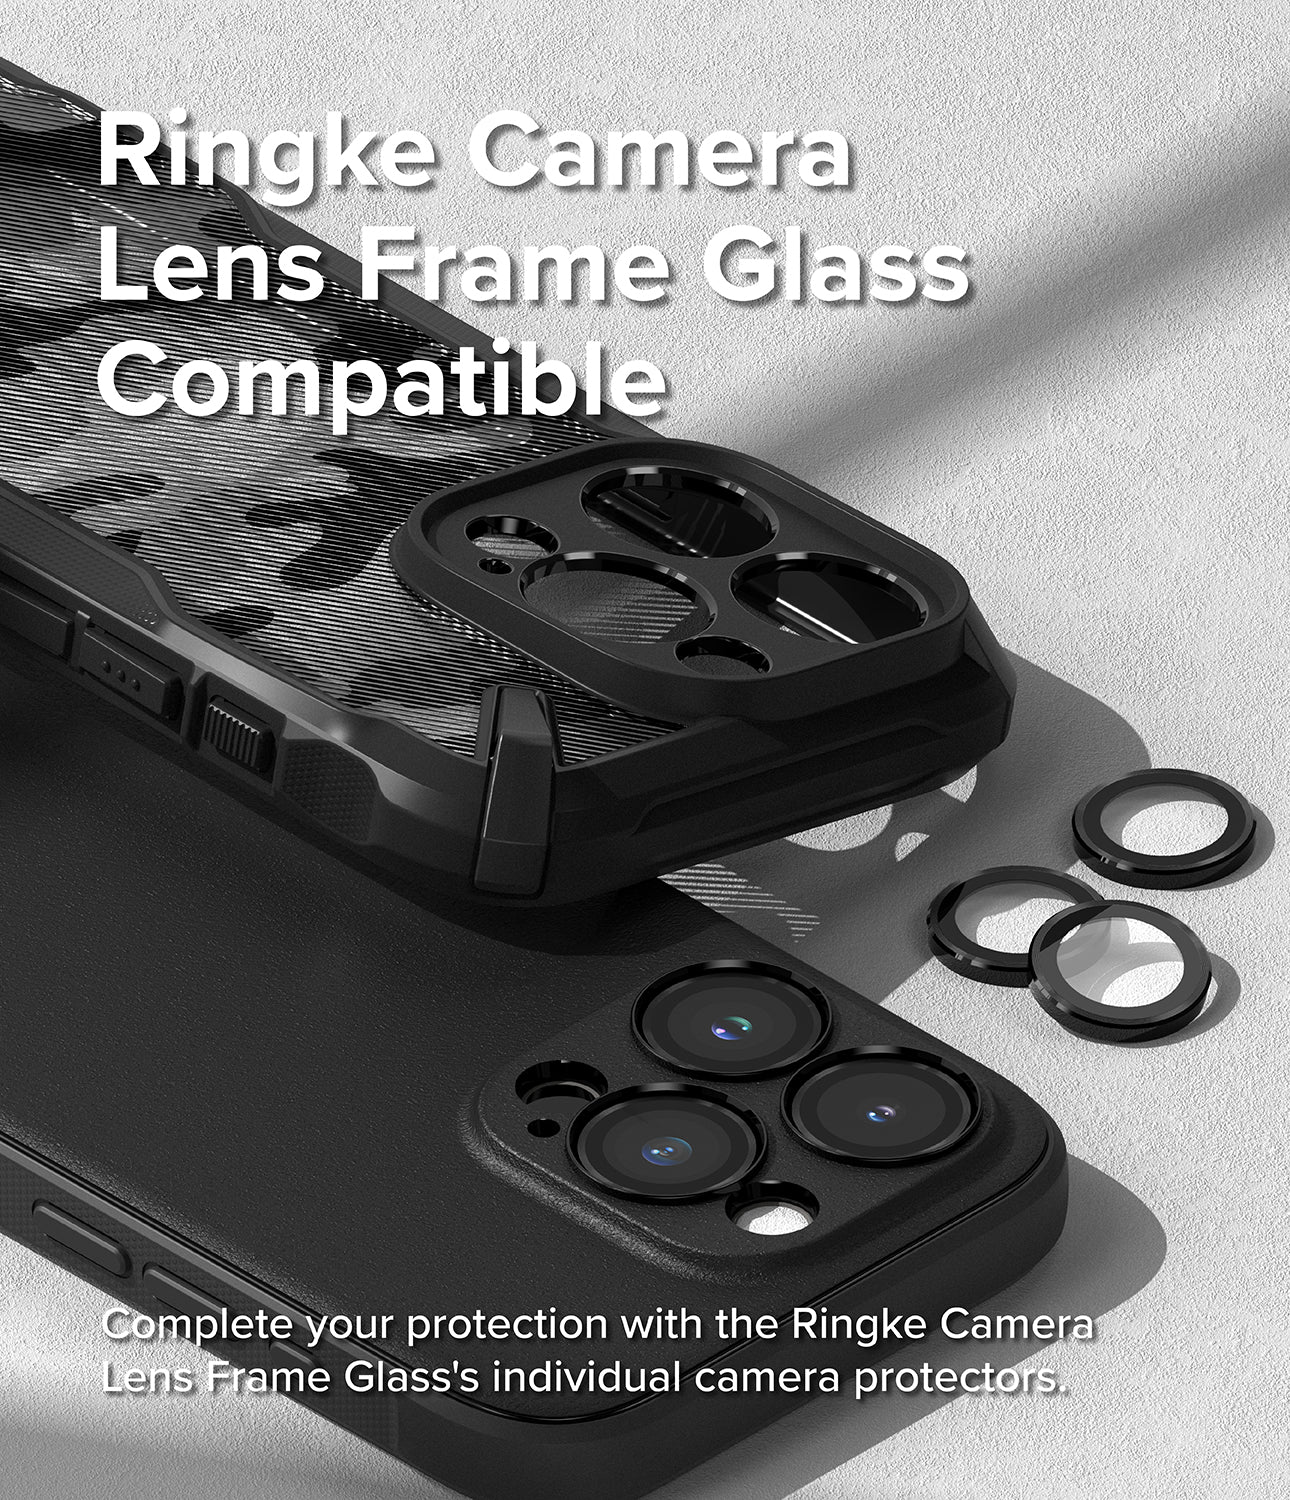 iPhone 15 Pro Max Case | Onyx Design - Blue Brush - Ringke Camera Lens Frame Glass Compatible. Complete your protection with the Ringke Camera Lens Frame Glass' individual camera protectors.